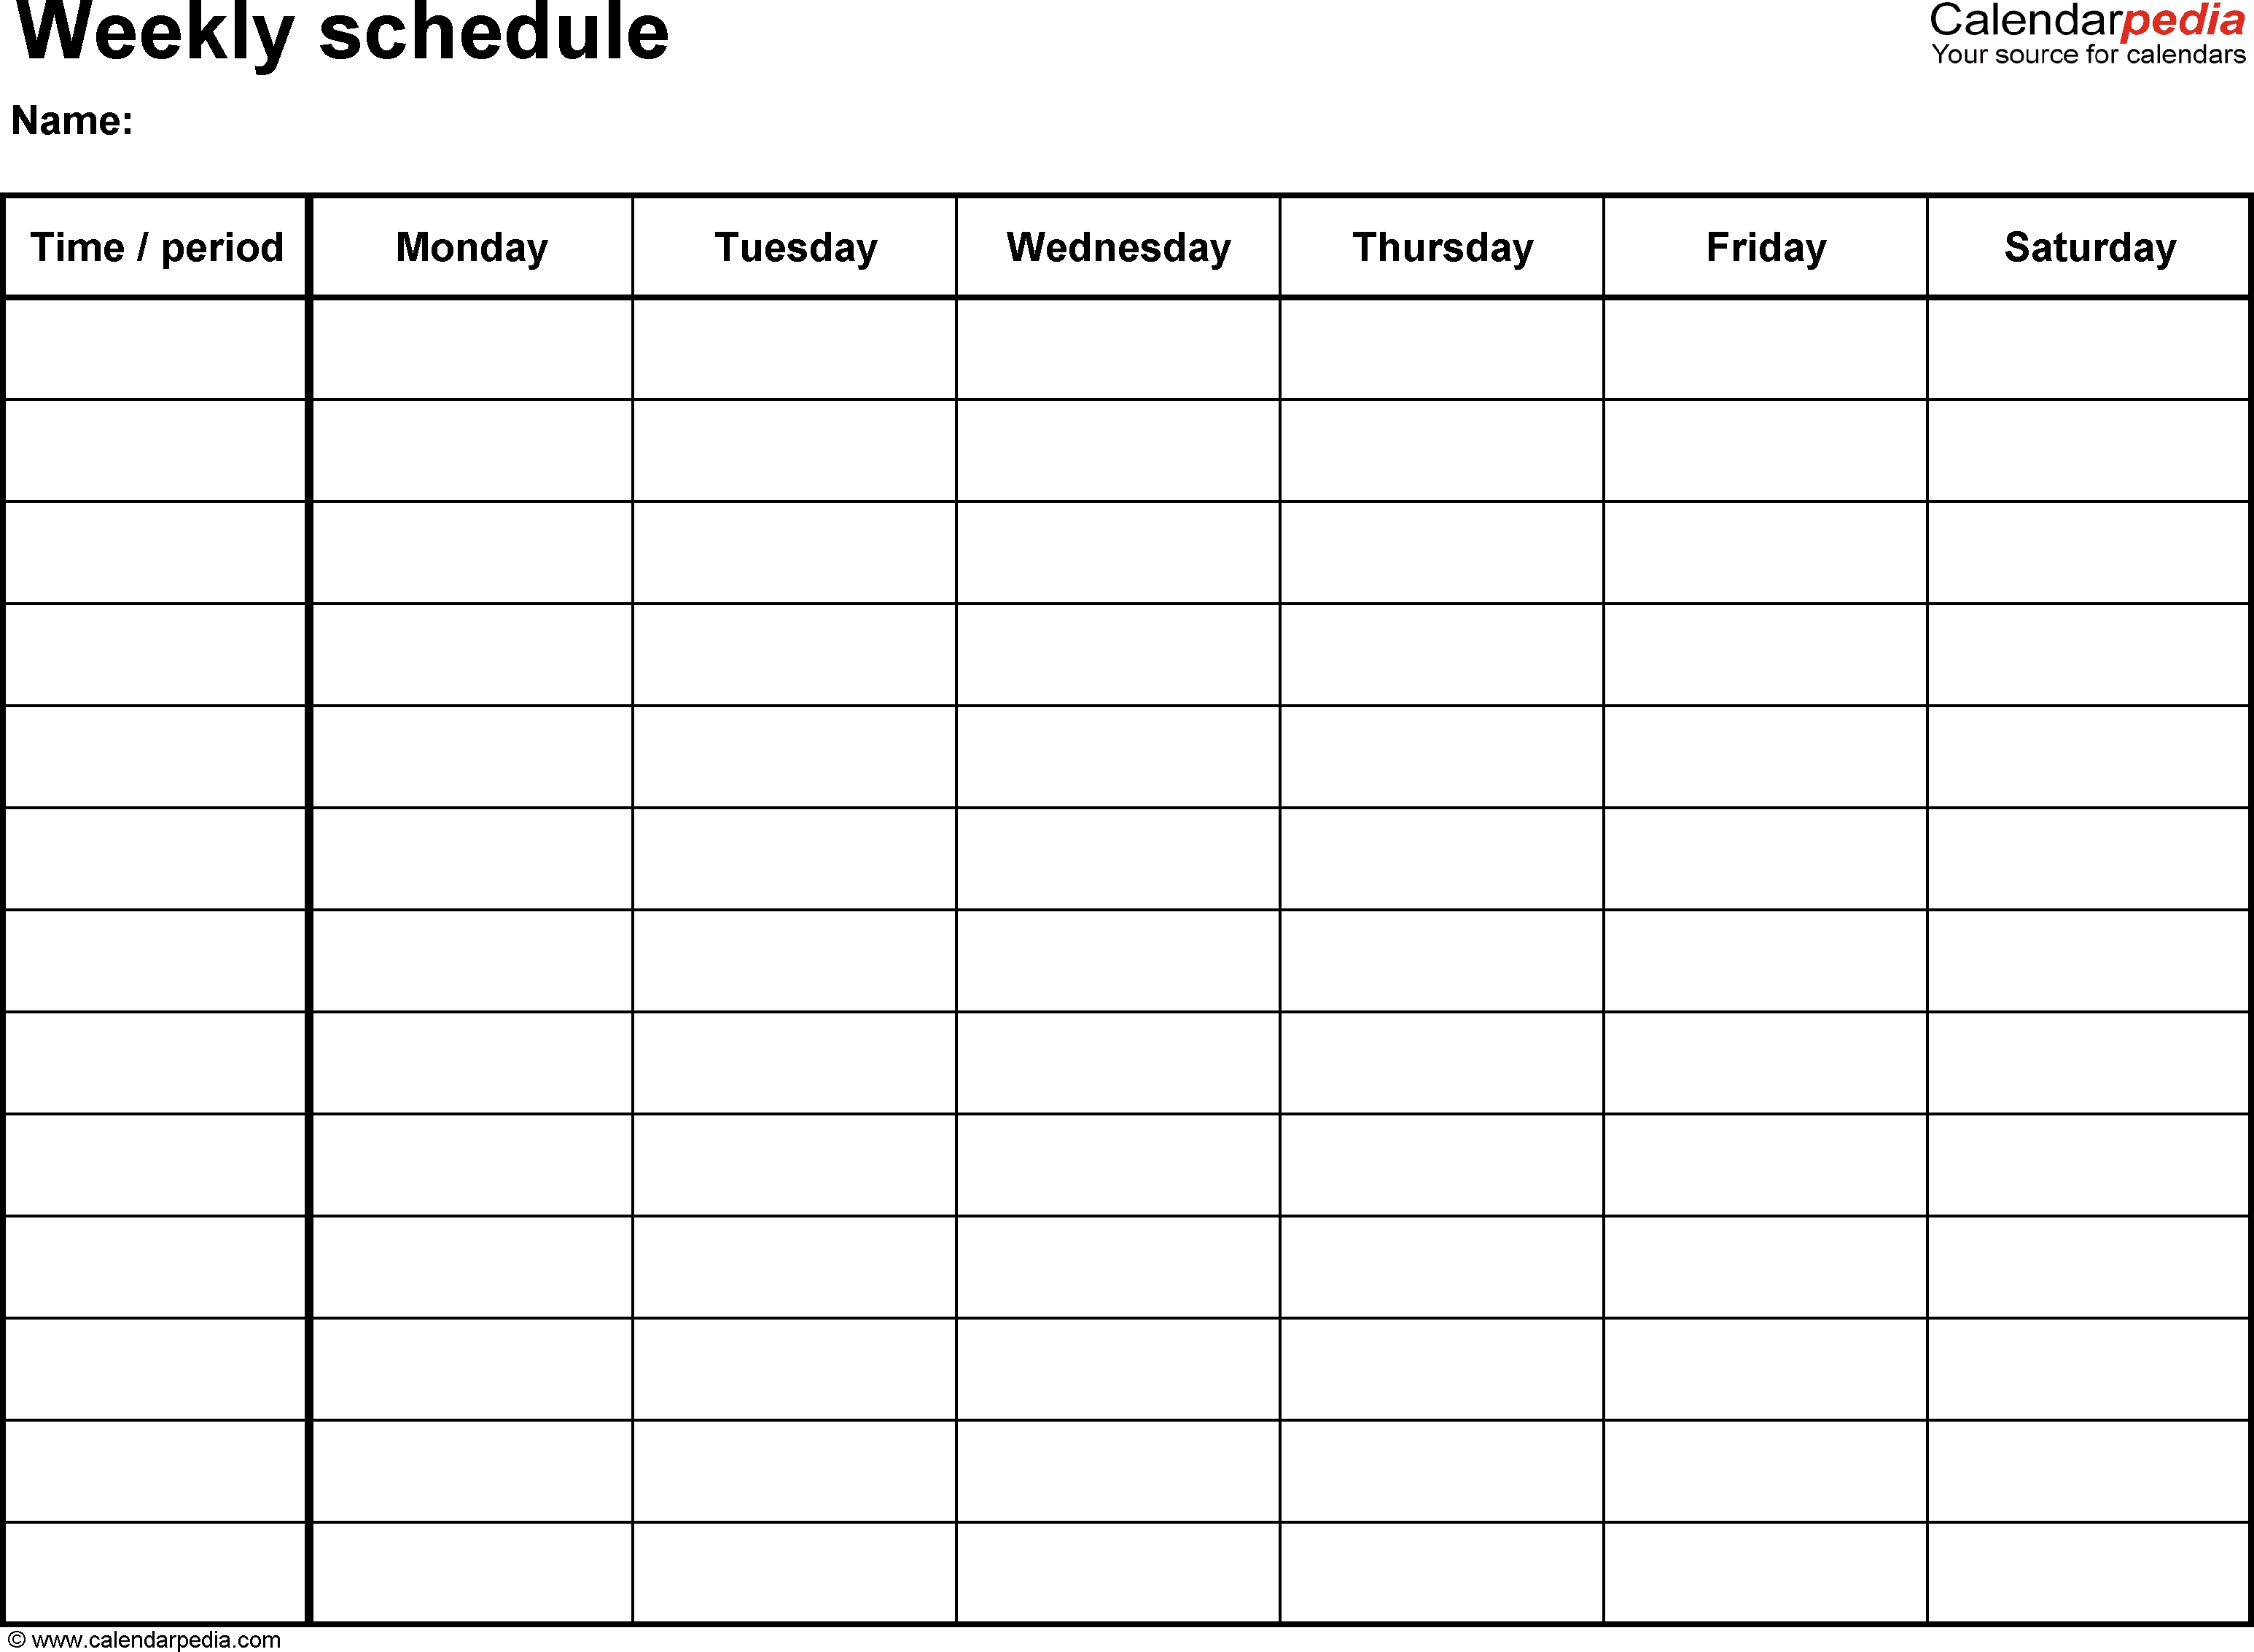 Free Weekly Schedule Templates For Word - 18 Templates regarding Monday Through Friday Daily Planner